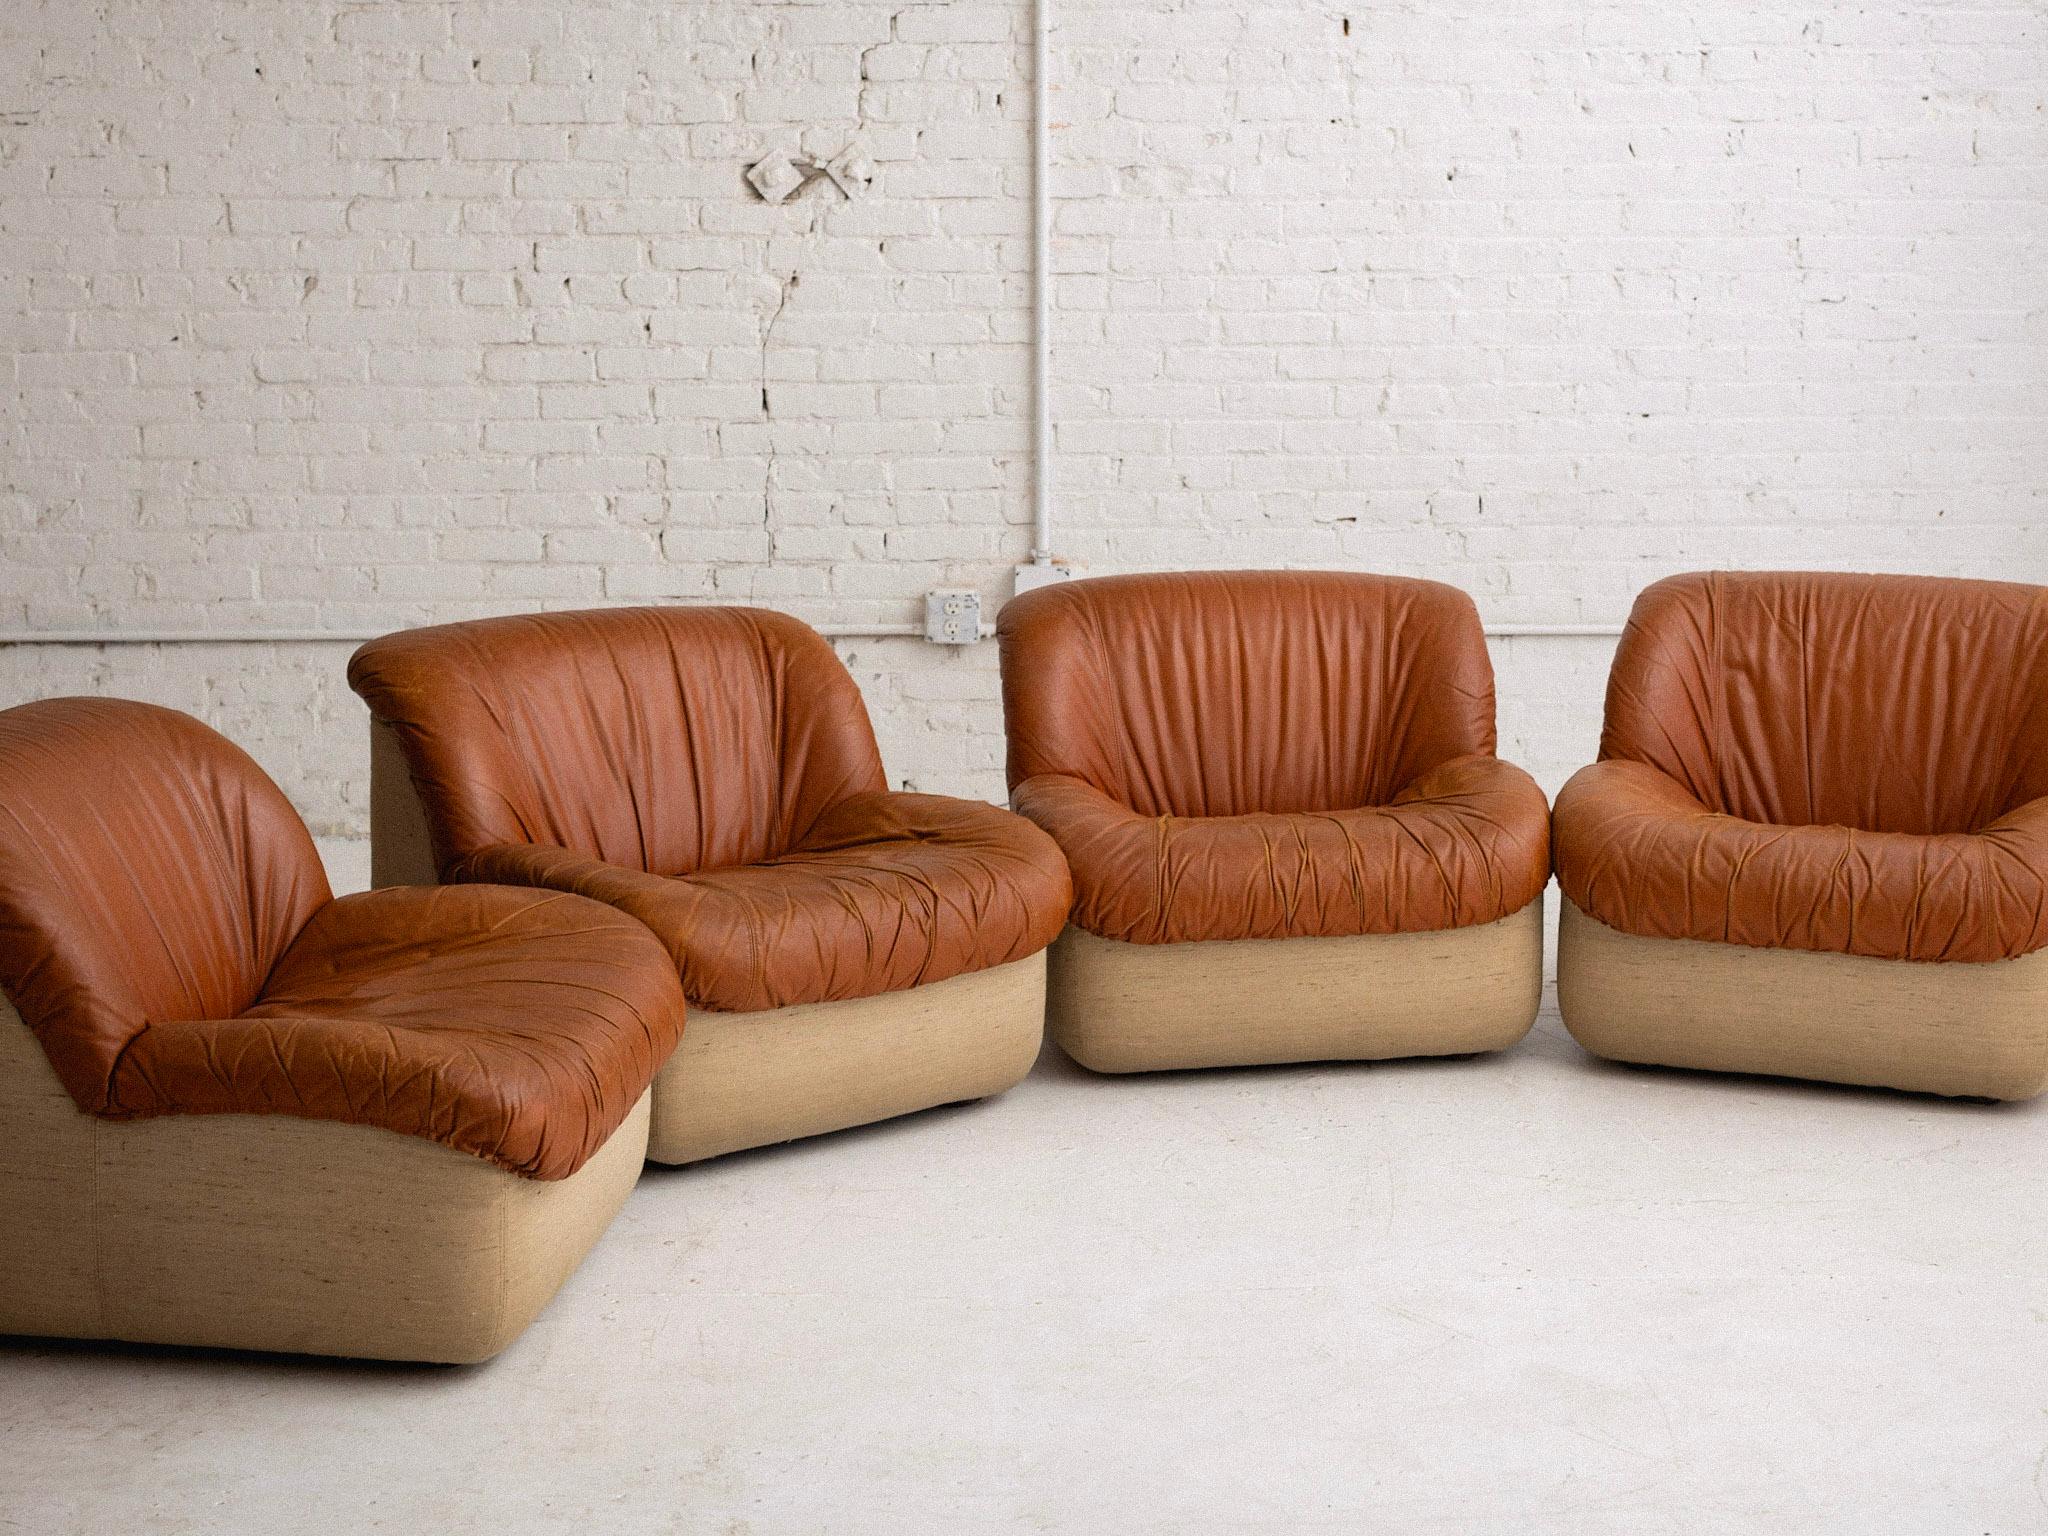 Henning Korch for Swan 'Caprice' Leather Chair / Modular Seating en vente 7